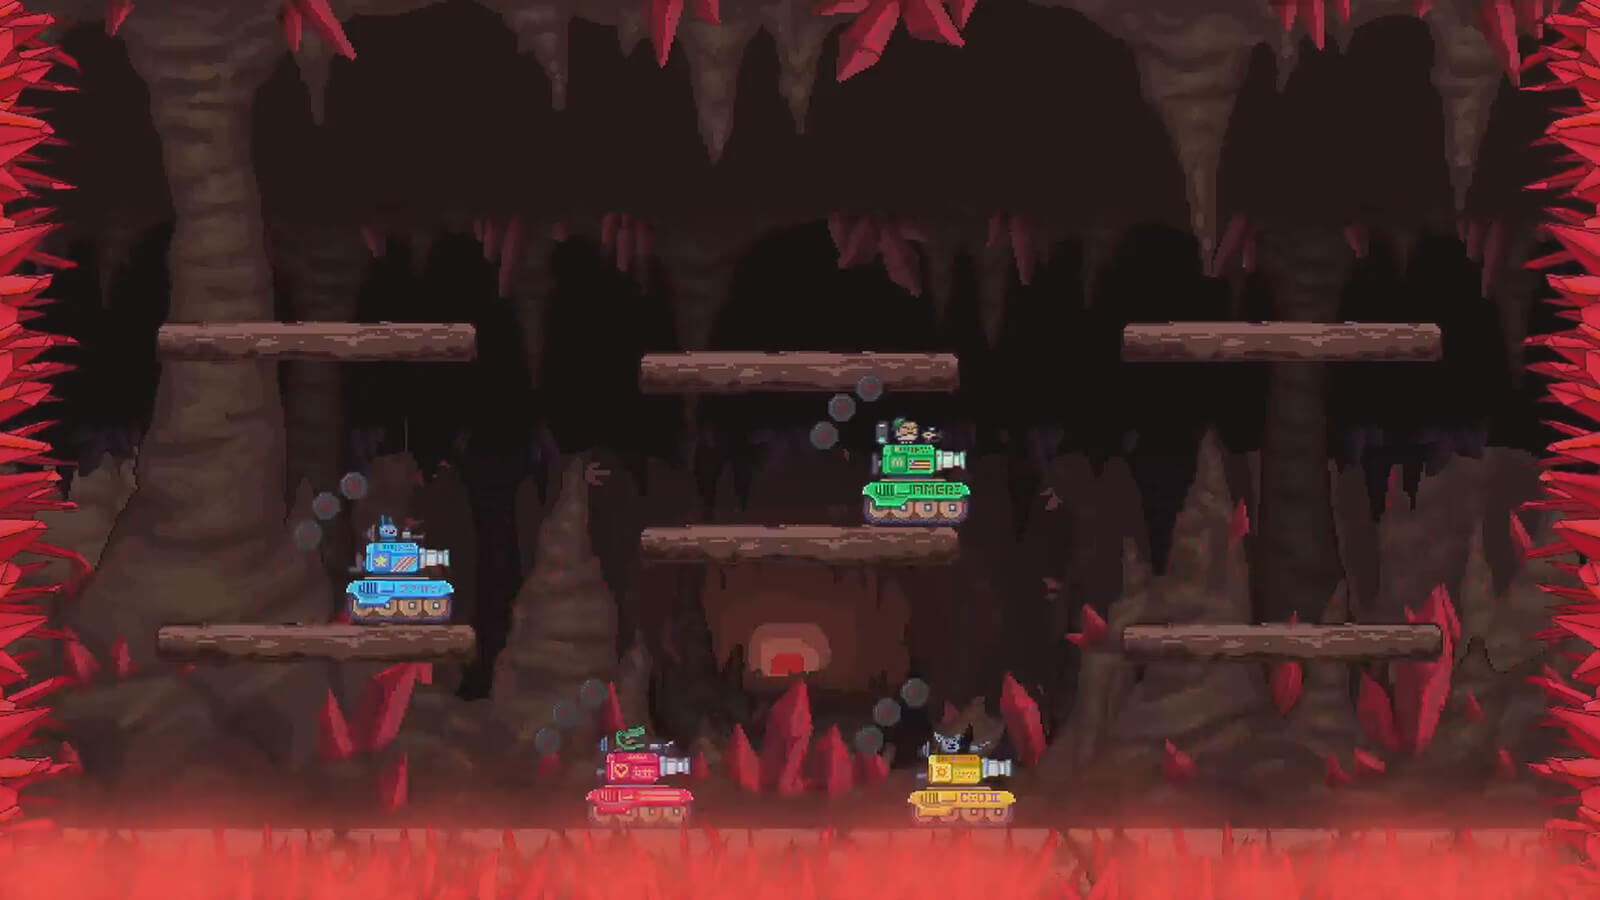 A green, yellow, blue and red tank fight in a room of sharp red crystals.